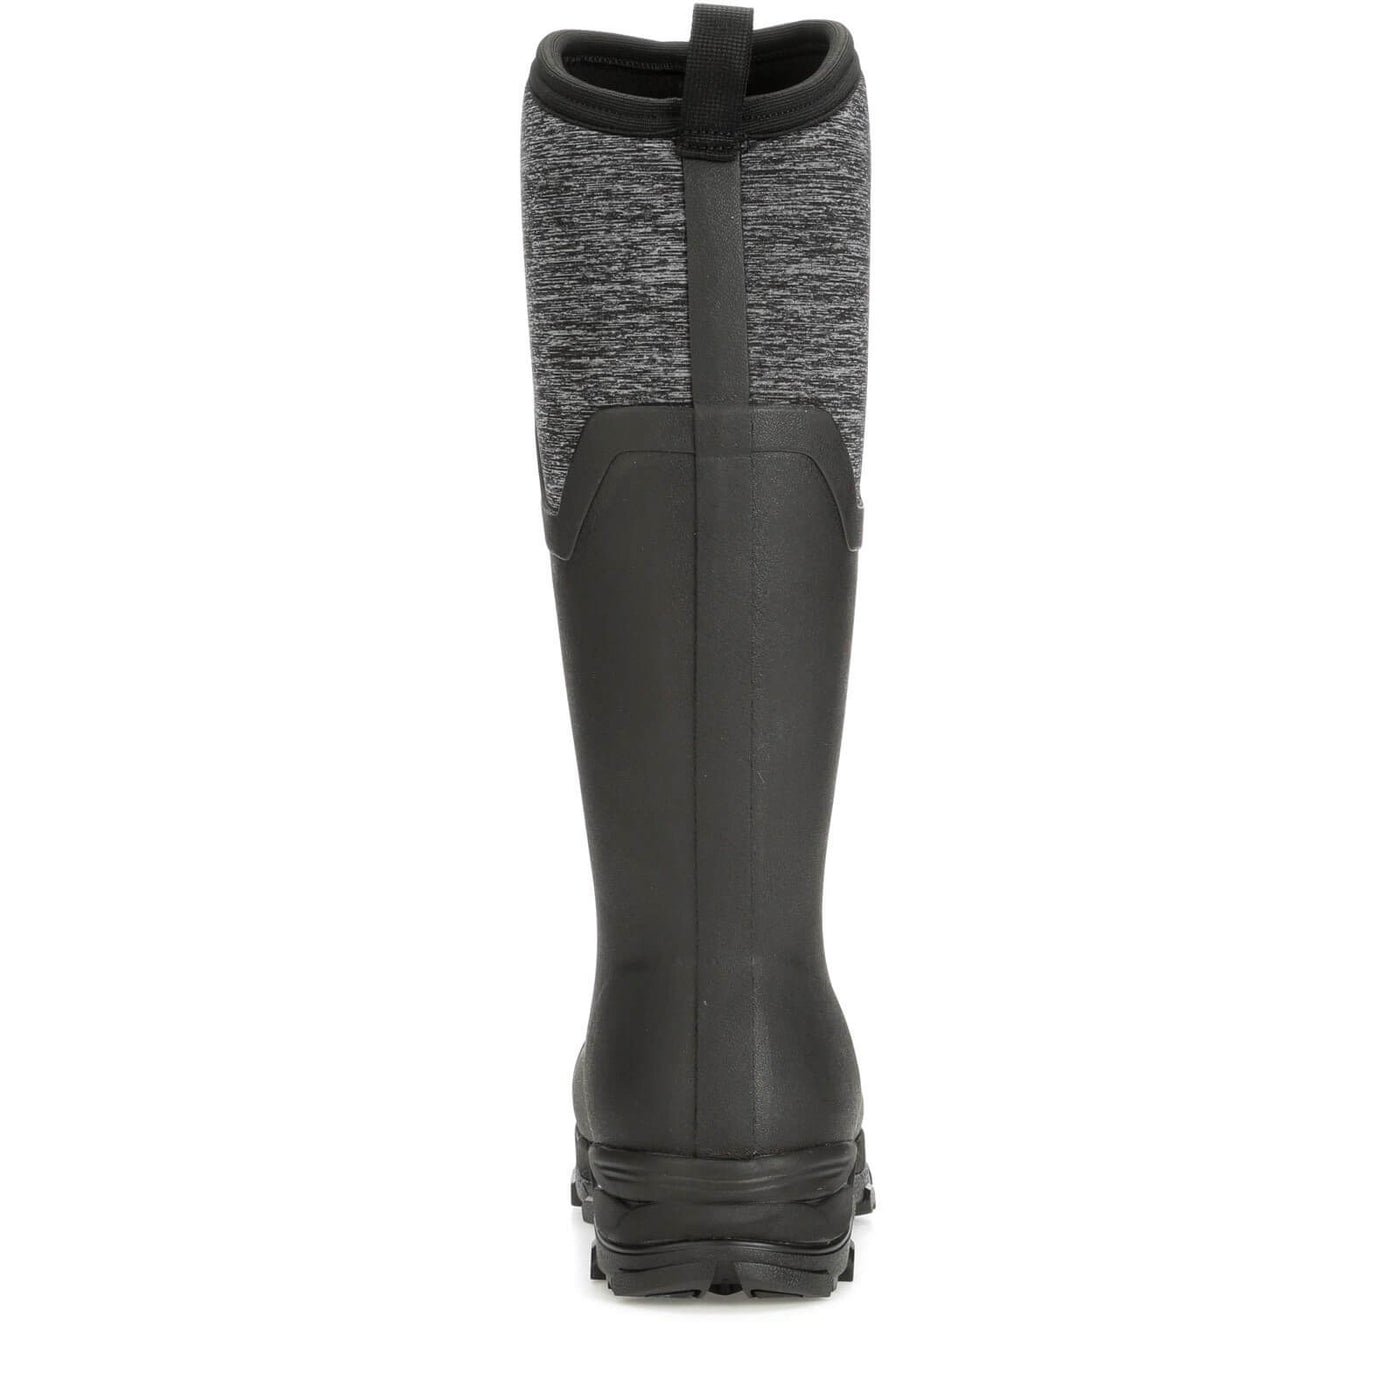 Muck Boots Arctic Ice Tall Wellington Boots Black/Jersey Heather 2#colour_black-jersey-heather